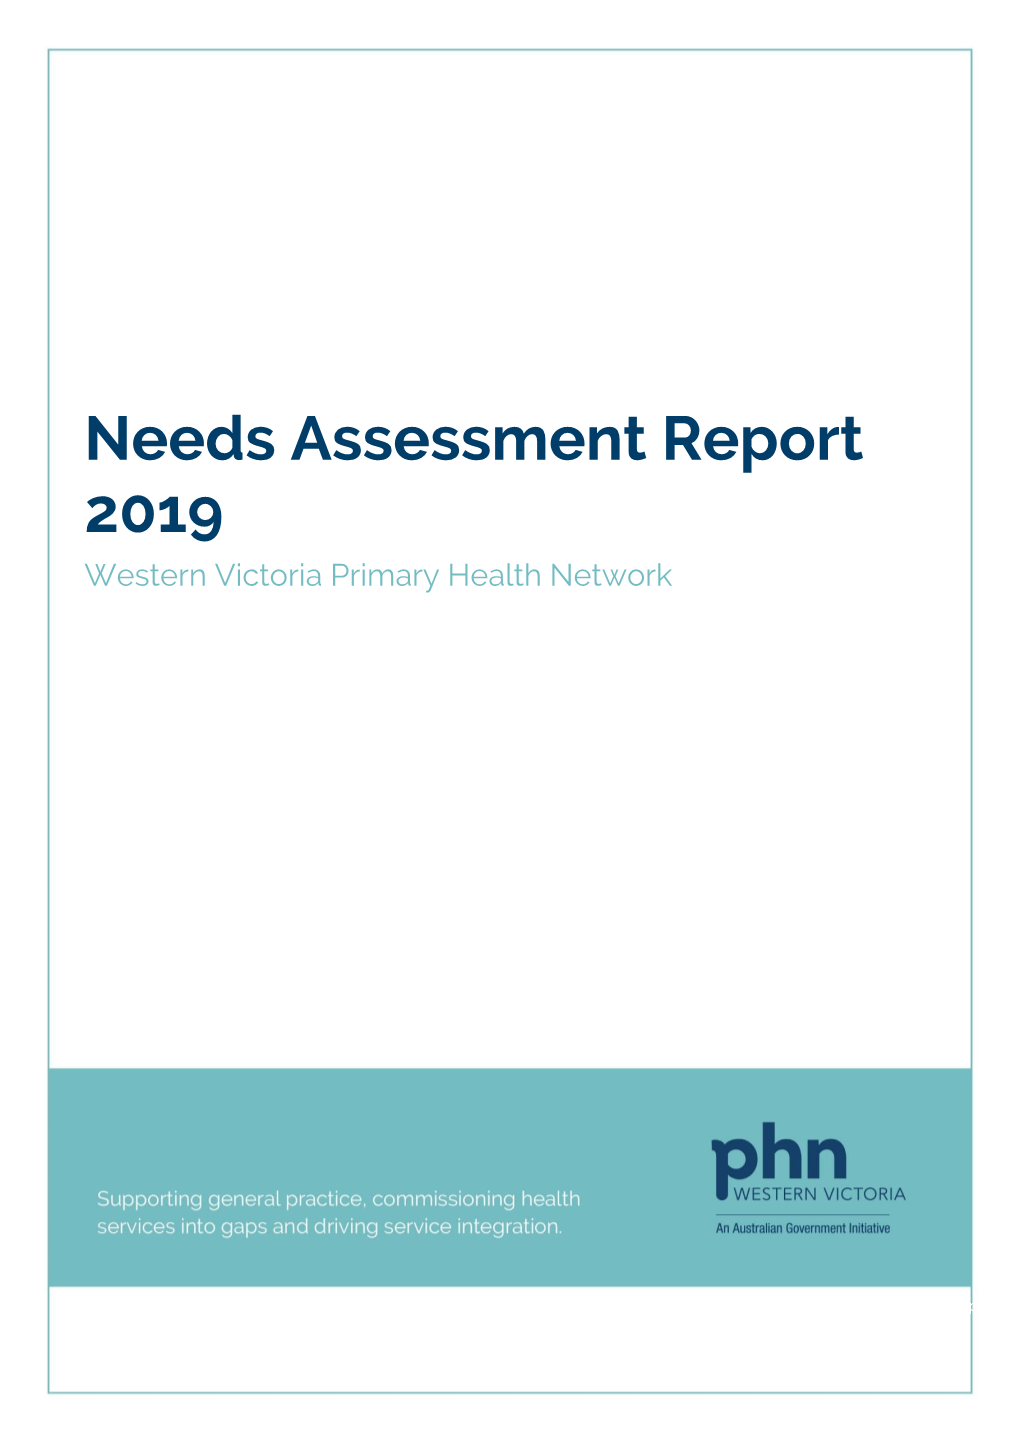 Needs Assessment Report 2019 Western Victoria Primary Health Network